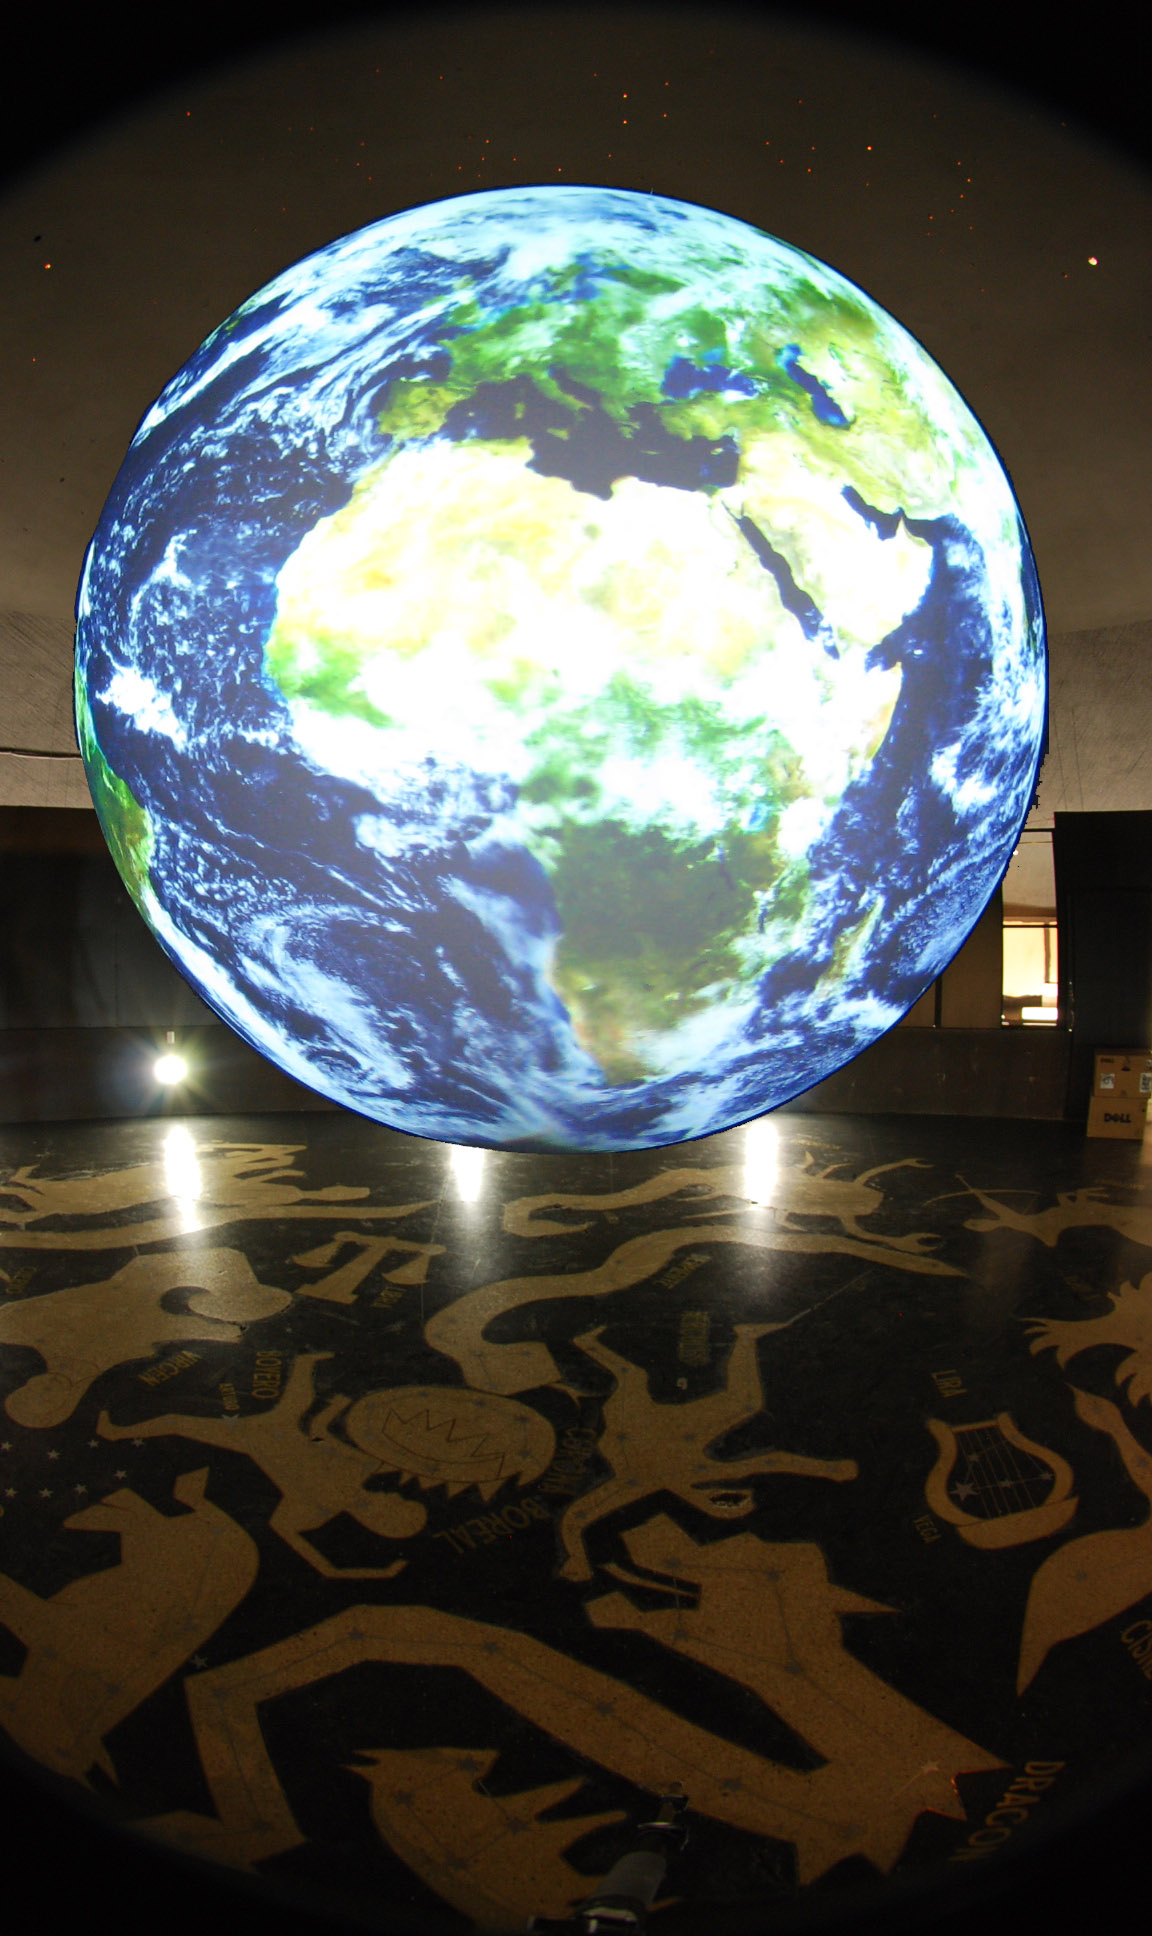 Science On a Sphere displays satellite imagery of Earth in an empty room. On the floor of the room are images of constellations.